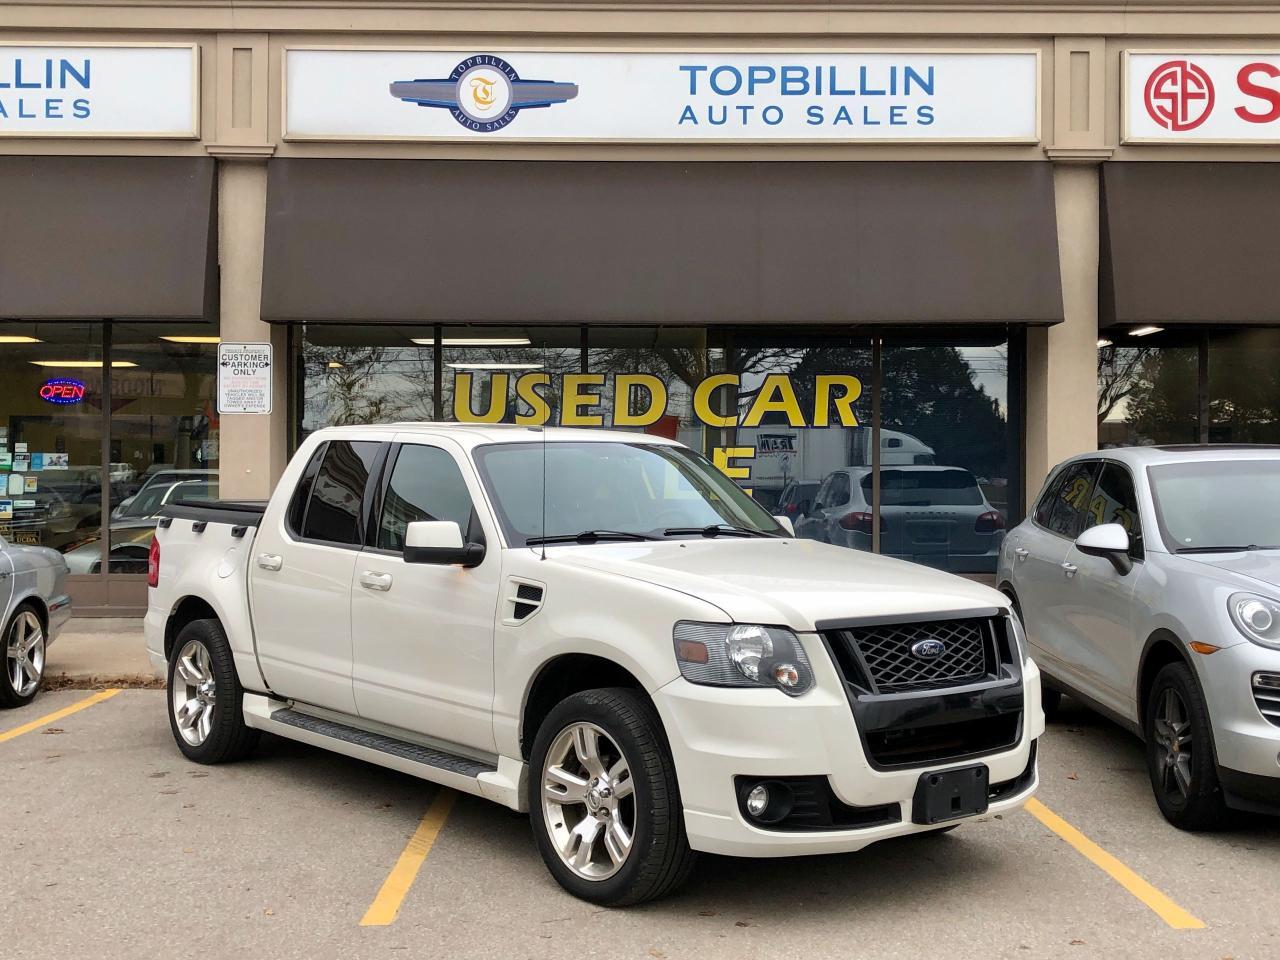 09 Ford Explorer Sport Trac Adrenalin 1 Owner Clean Carfax Vaughan